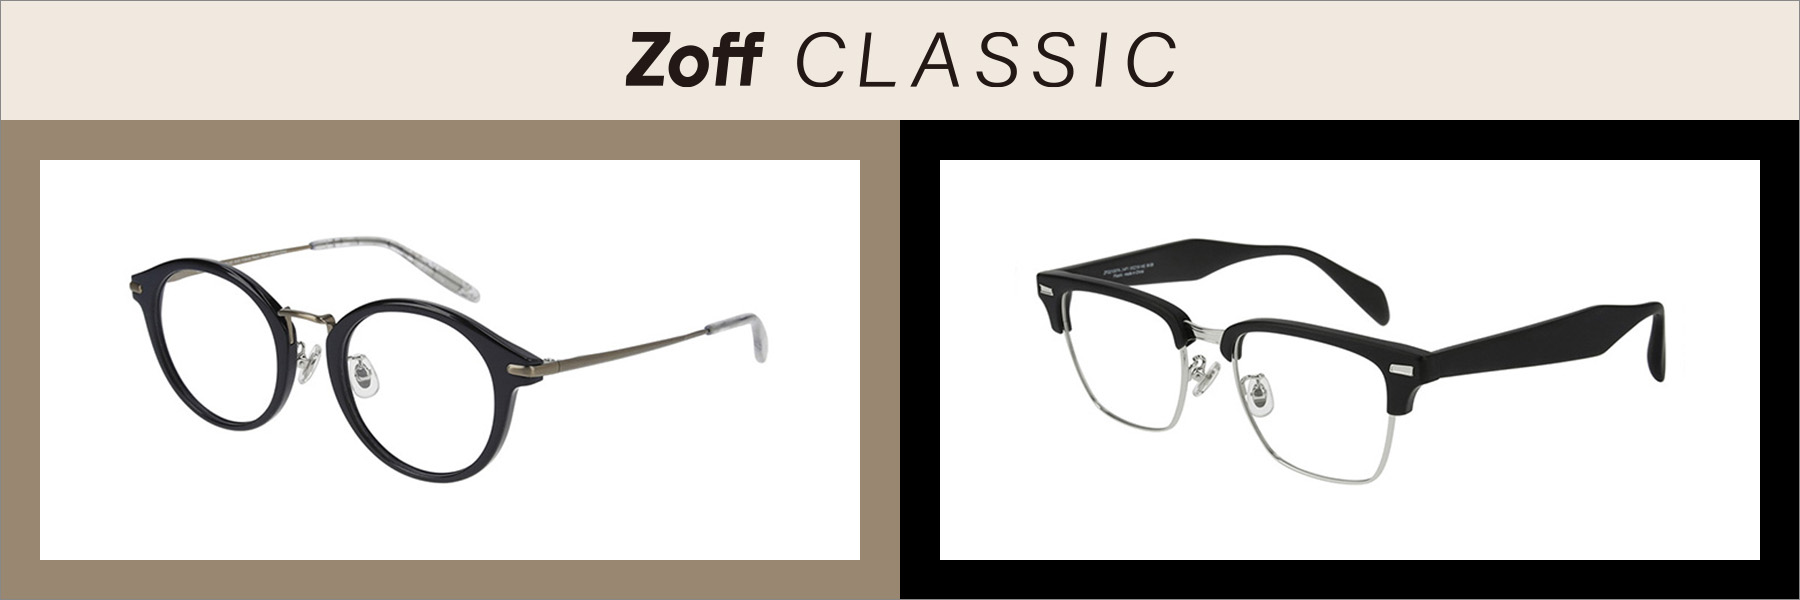 Zoff CLASSIC SPRING COLLECTION